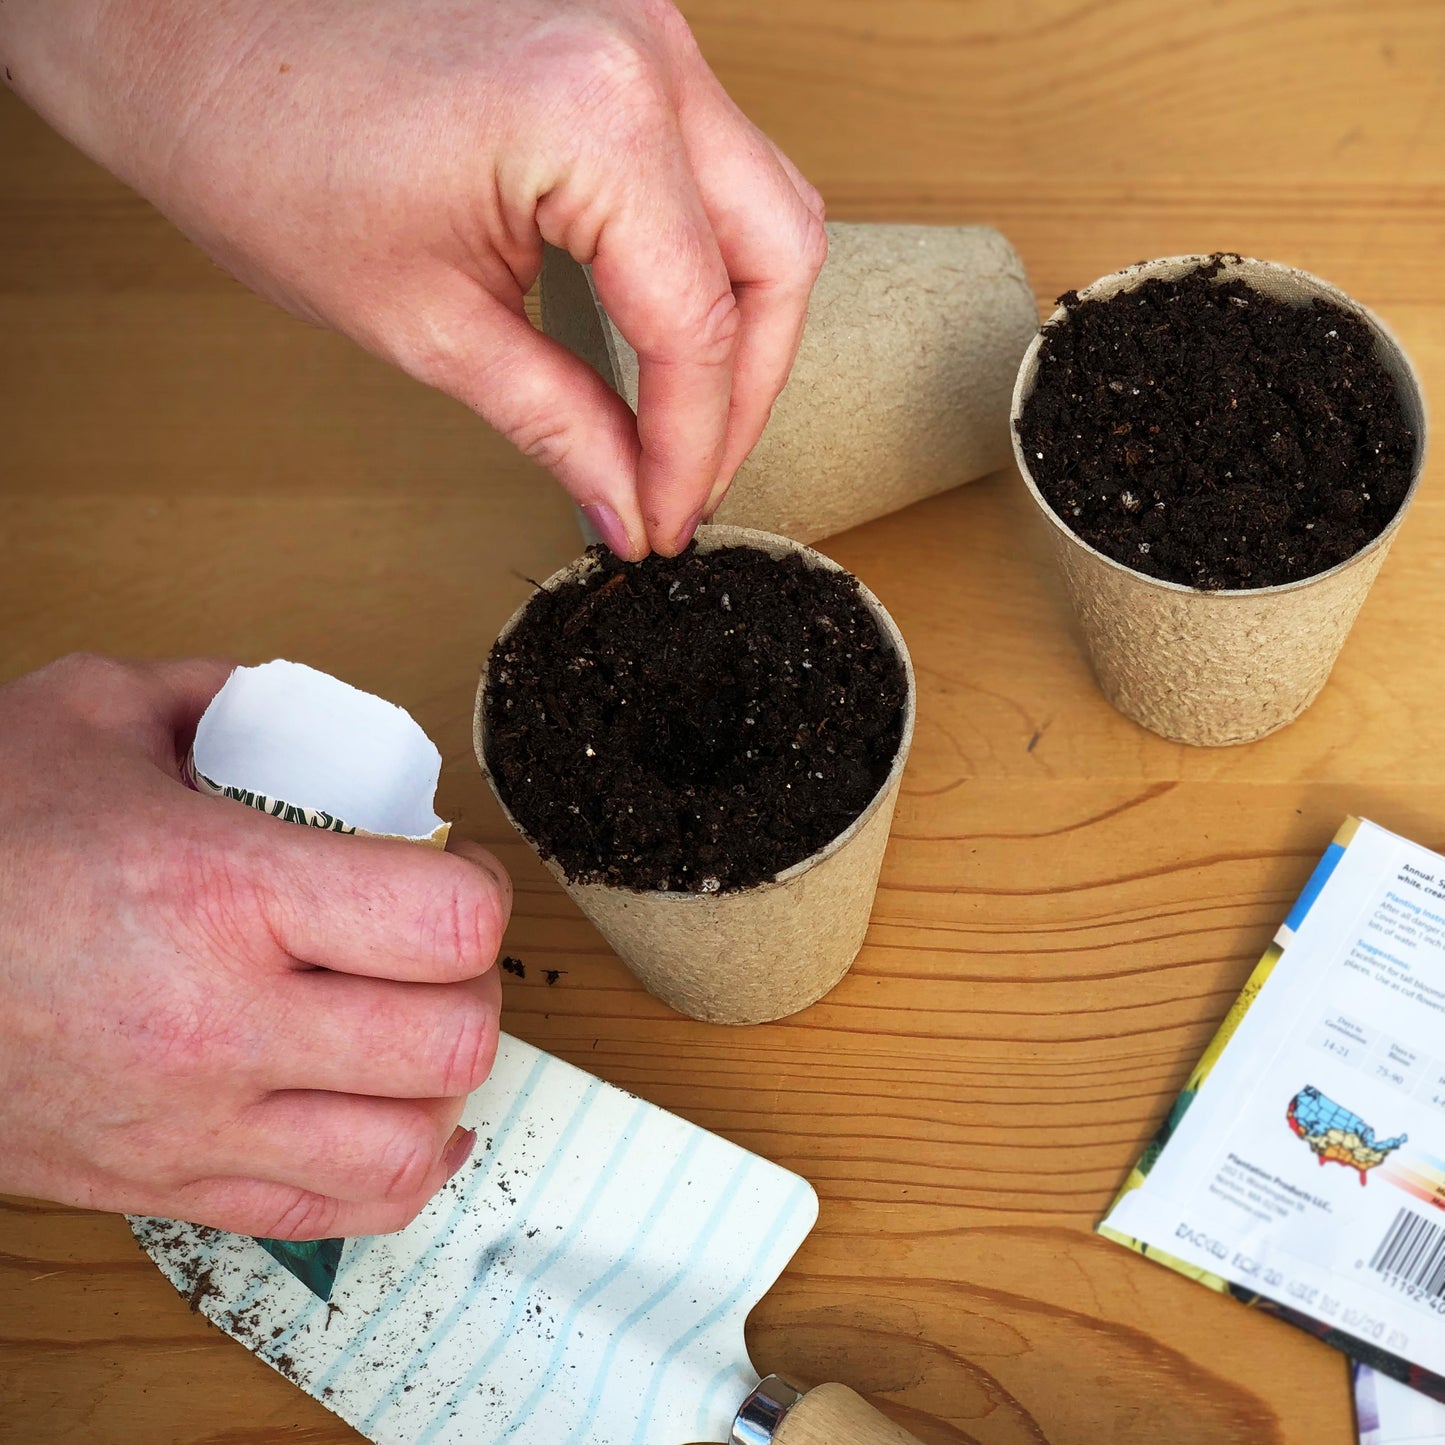 Sowing Roma VF Tomato Seeds into biodegradable peat pots filled with Jiffy seed starting mix. Peat pots will help prevent root shock after transplanting.